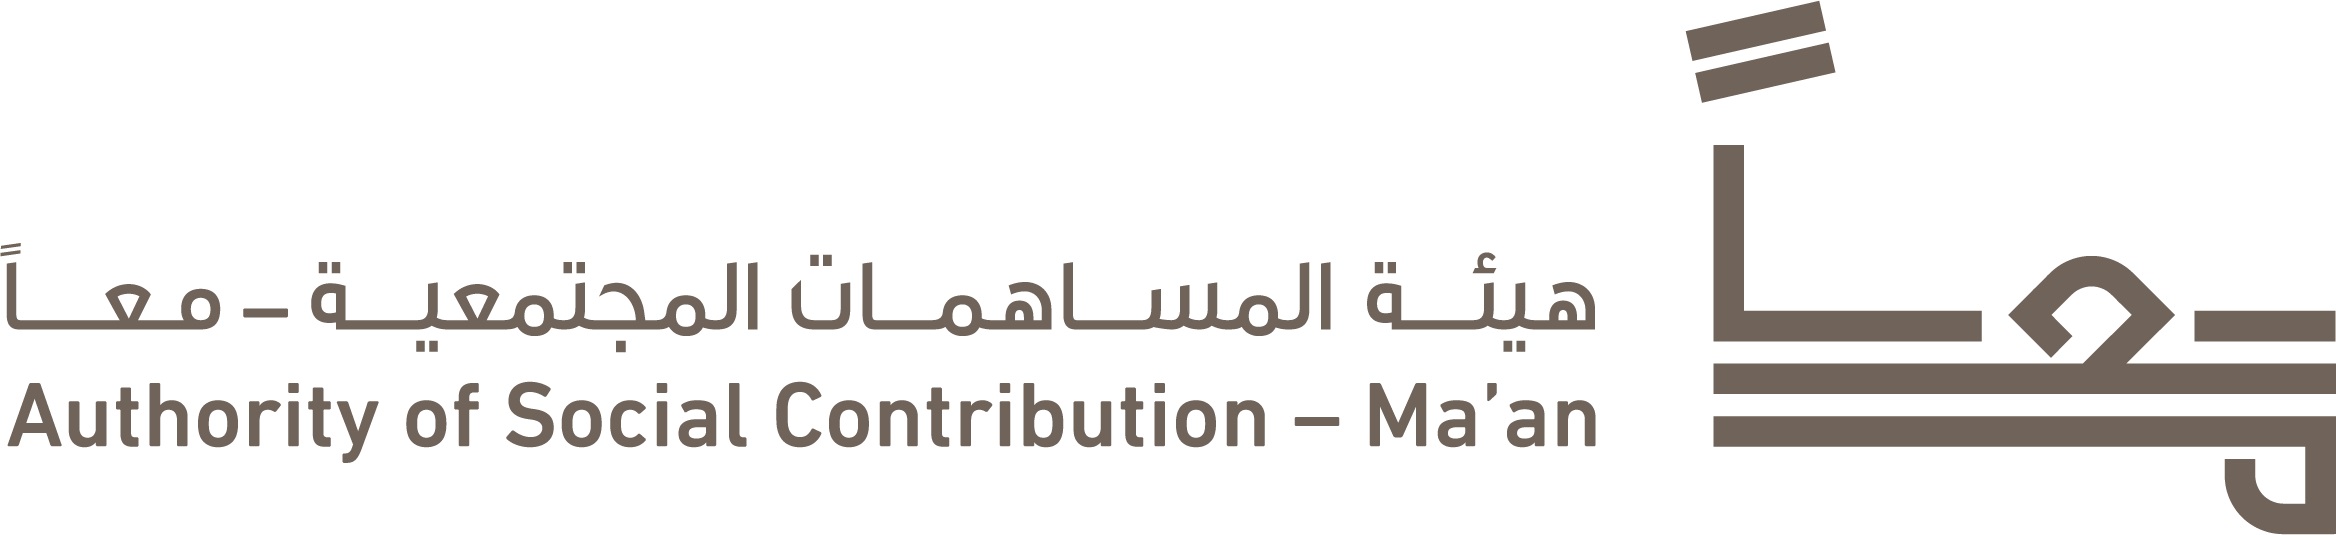 The Authority of Social Contribution - Ma'an